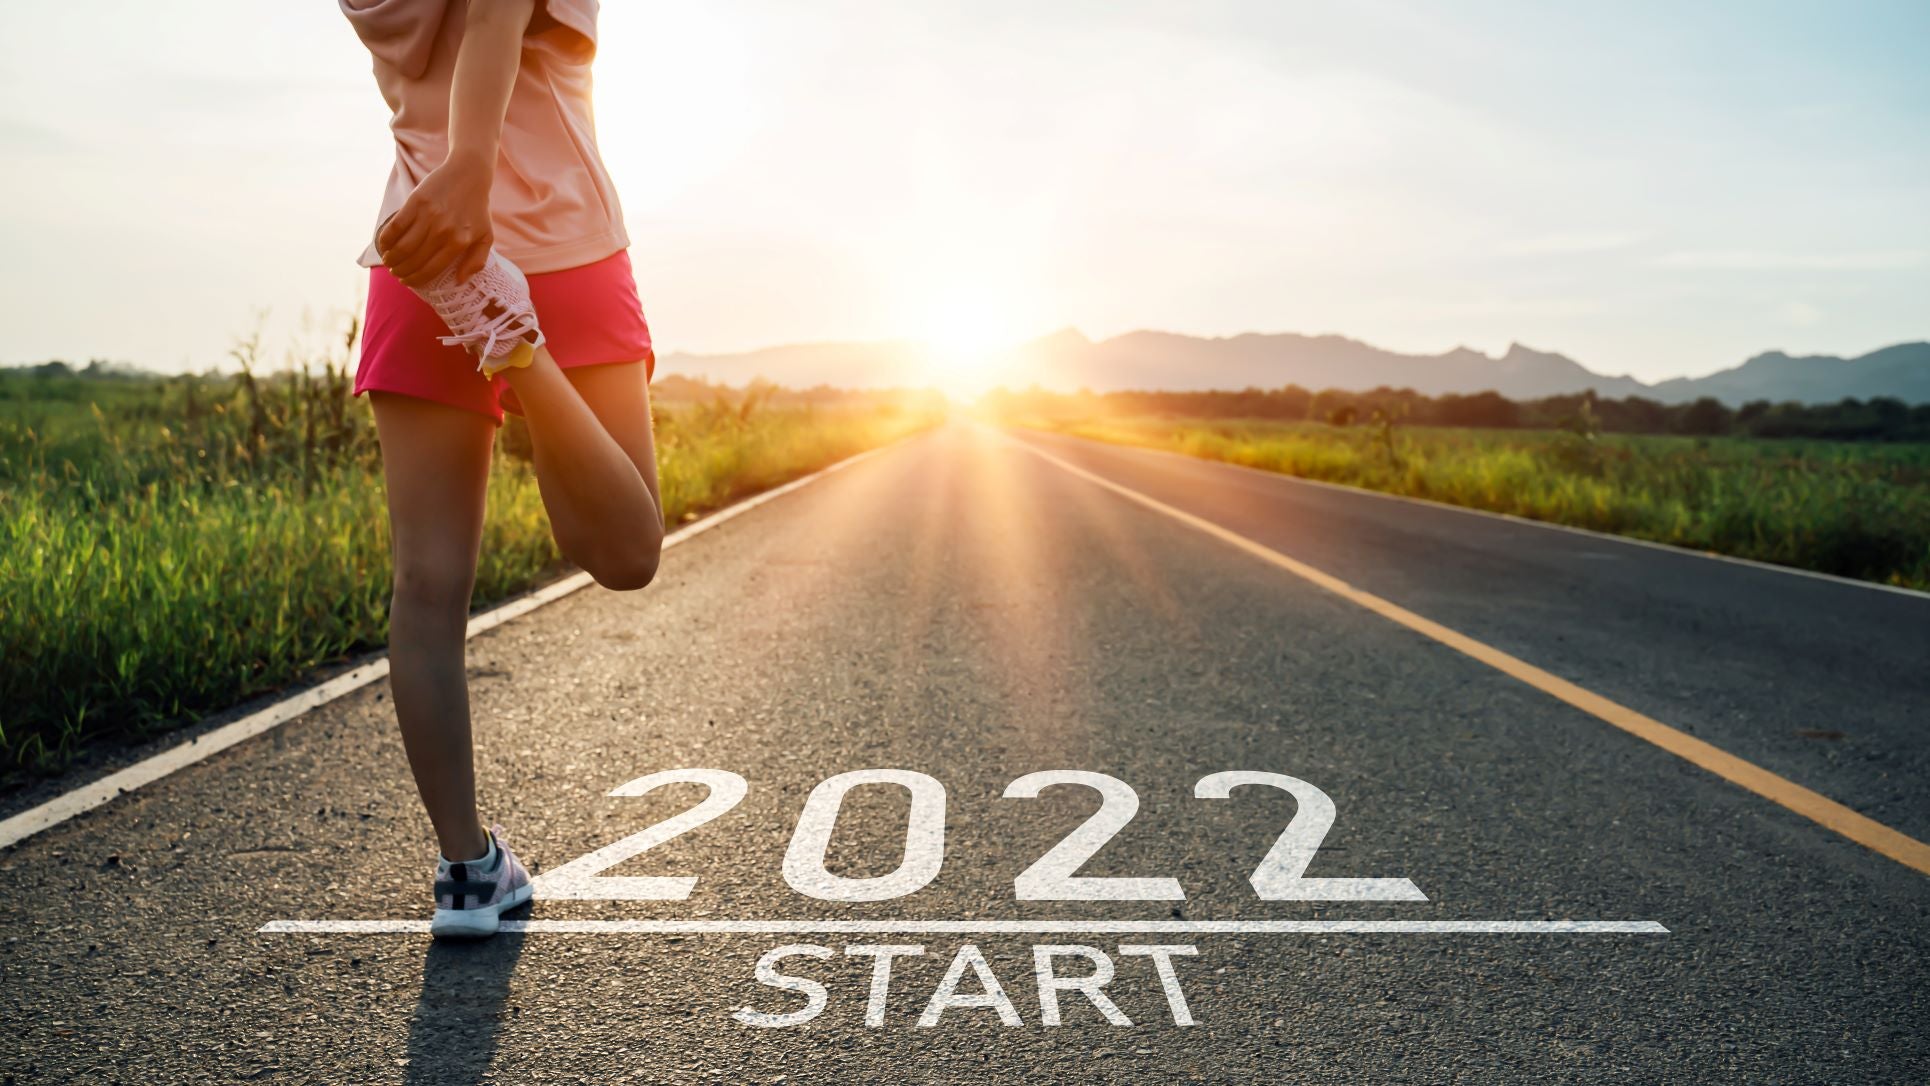 The Top 6 Health and Fitness Goals to Make in 2022